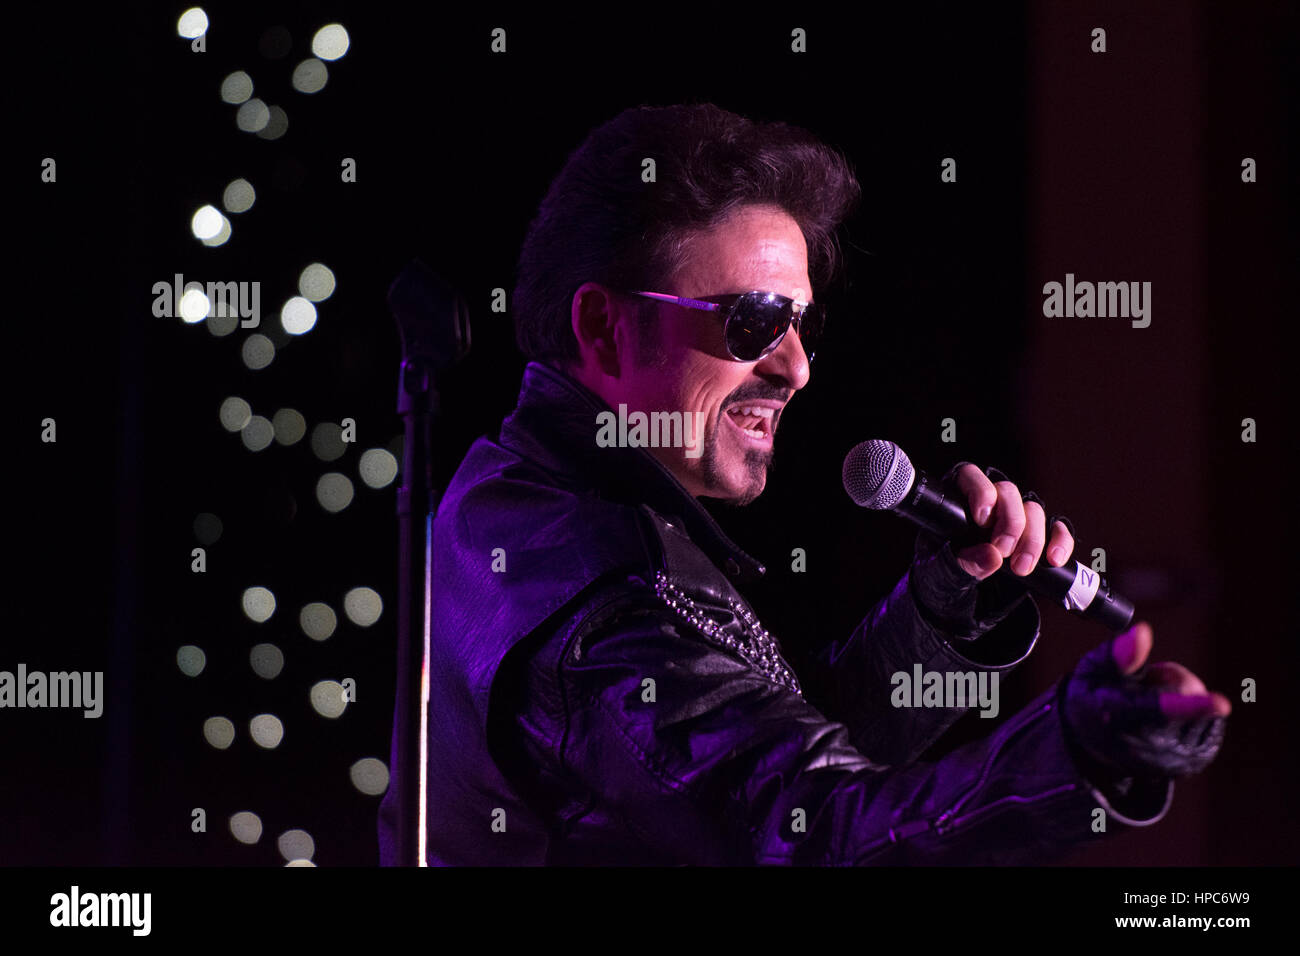 Las Vegas, USA. 20th Feb, 2017. George Michael impersonator Bill Pantazis performs during The Reel Awards at the Golden Nugget Hotel & Casino in Las Vegas, Nev., on February 20, 2017. The awards show is meant to be a humorous tribute to the Academy Awards. (Photo by Jason Ogulnik) Credit: Jason Ogulnik/Alamy Live News Stock Photo